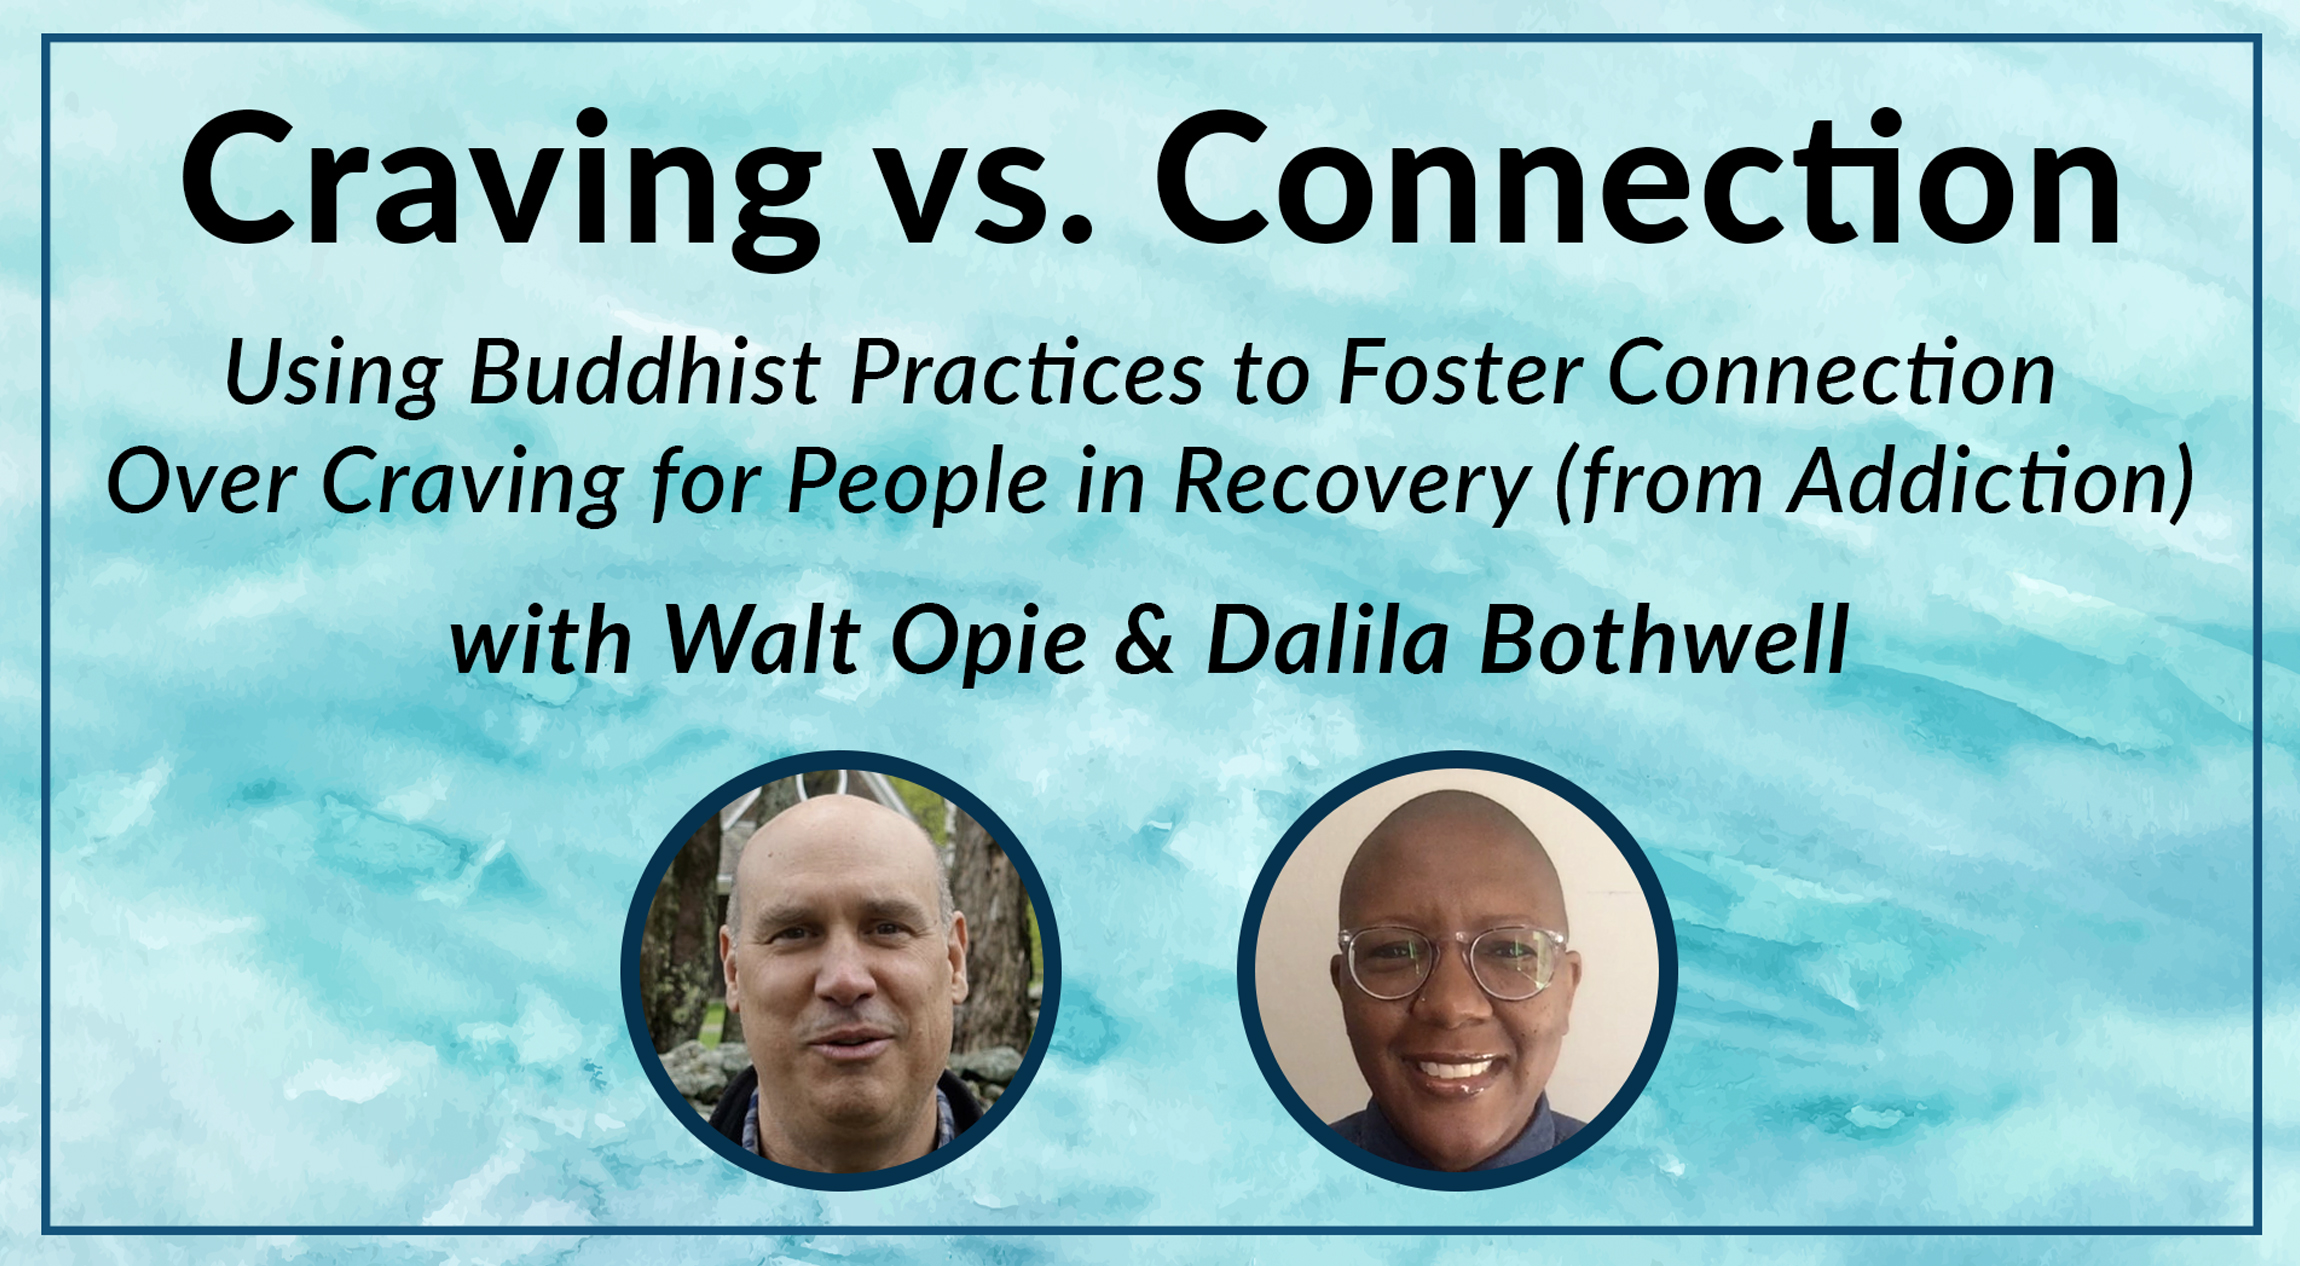 Craving vs. Connection with Walt Opie and Dalila Bothwell